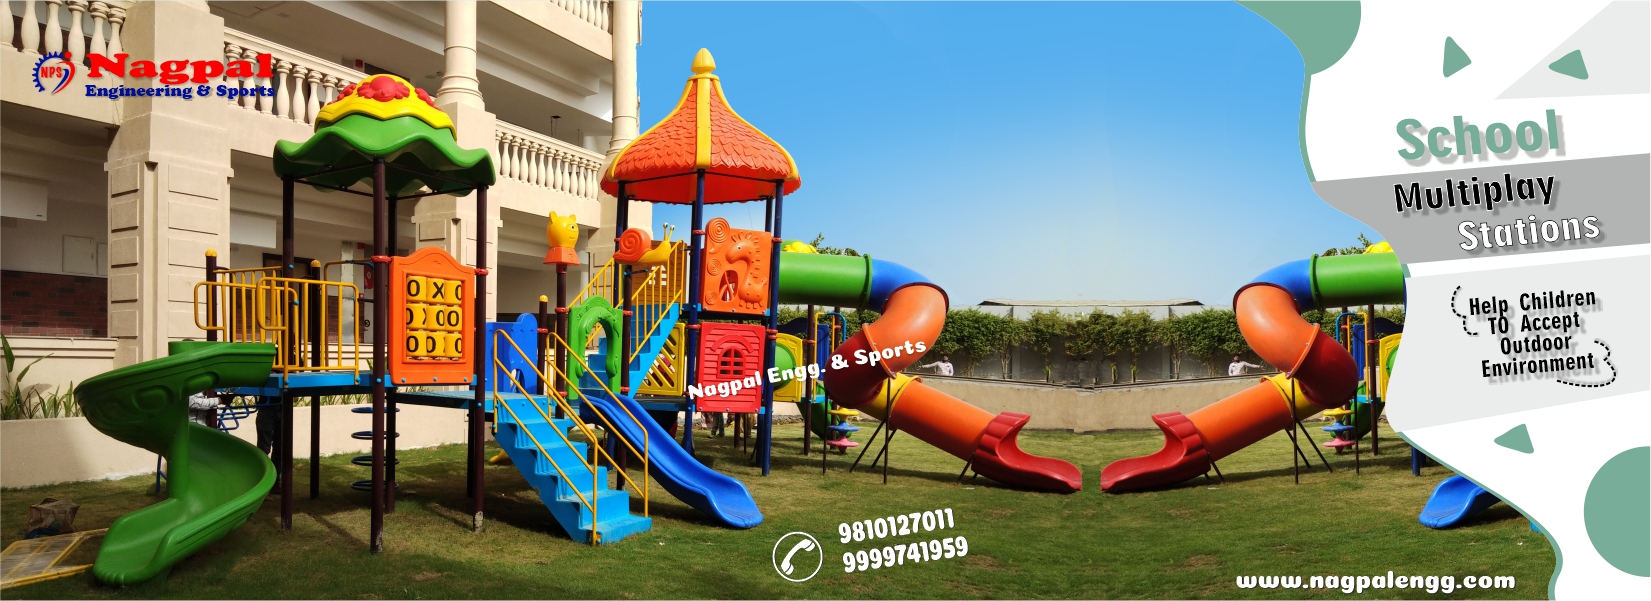 Roto Multiplay System Manufacturers, Exporters & Suppliers in Jamnagar